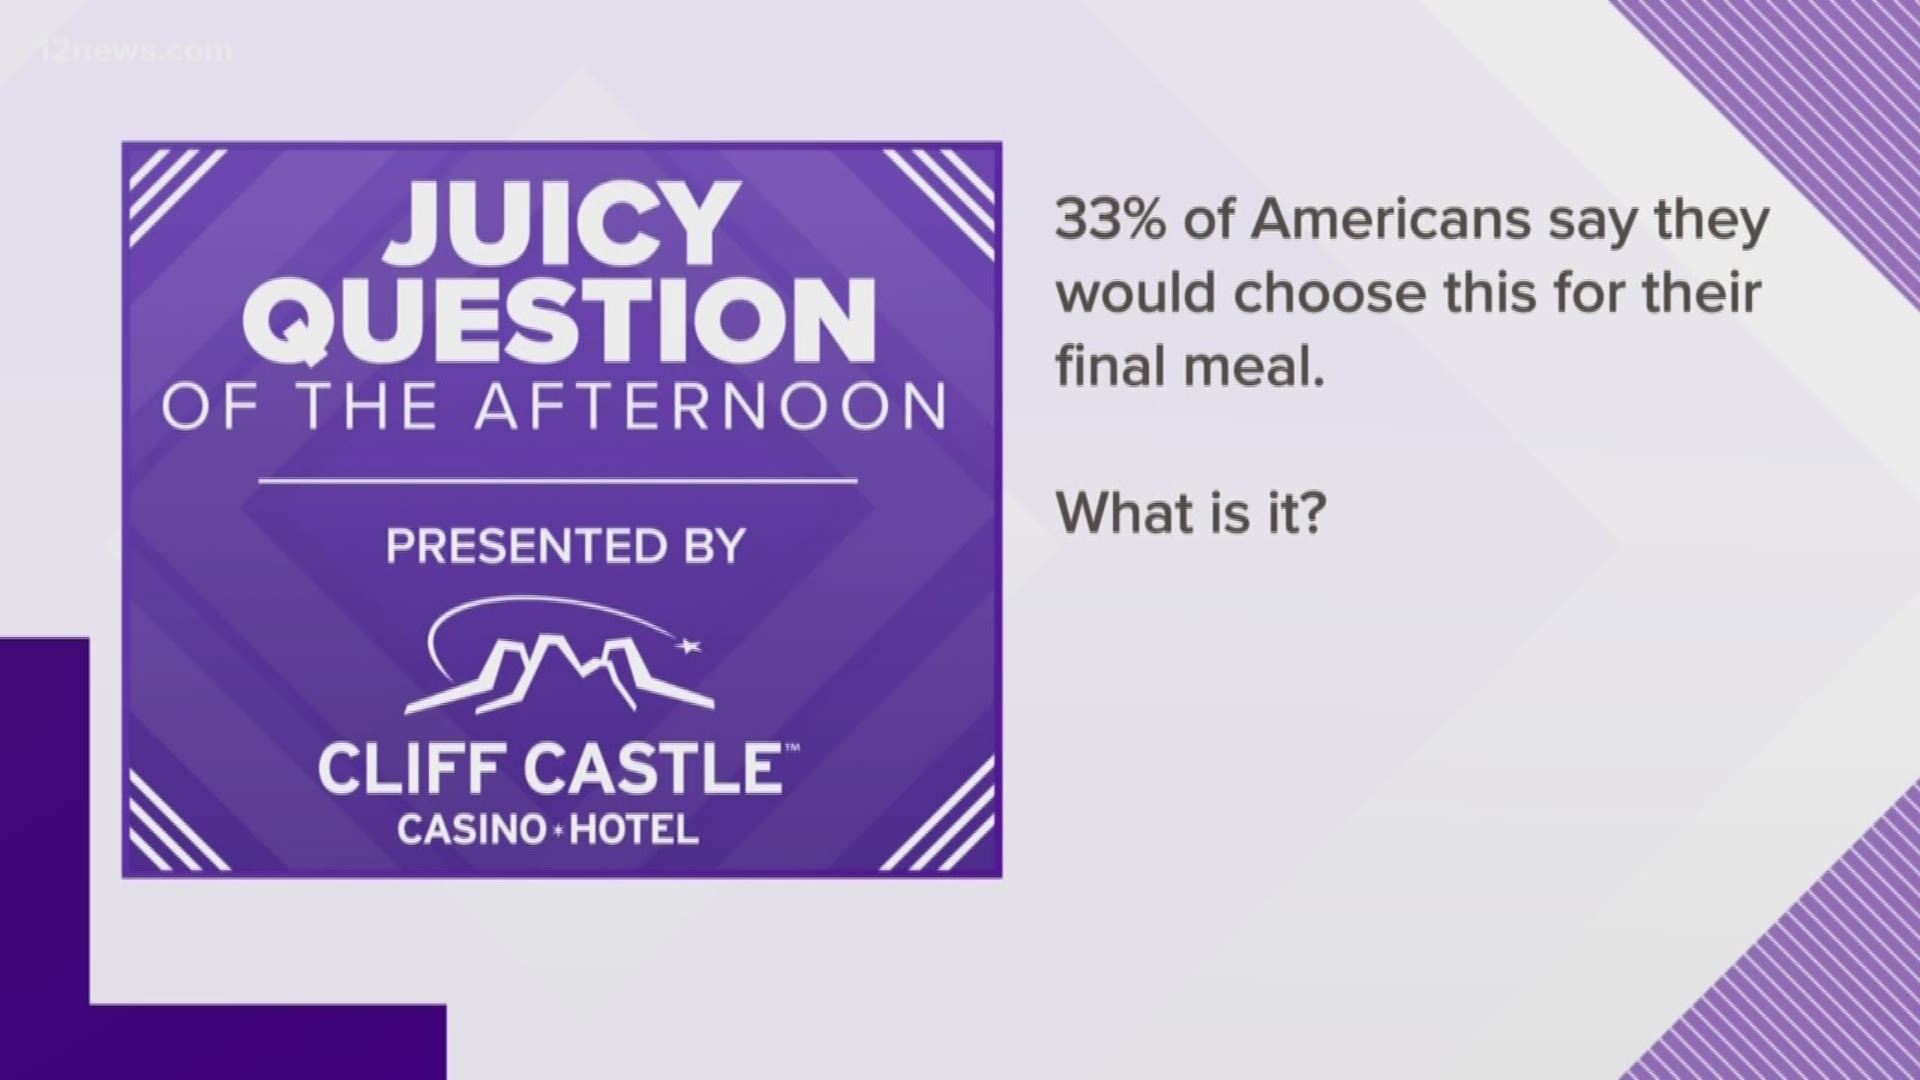 33% of Americans say they would choose THIS for their final meal. What is it?